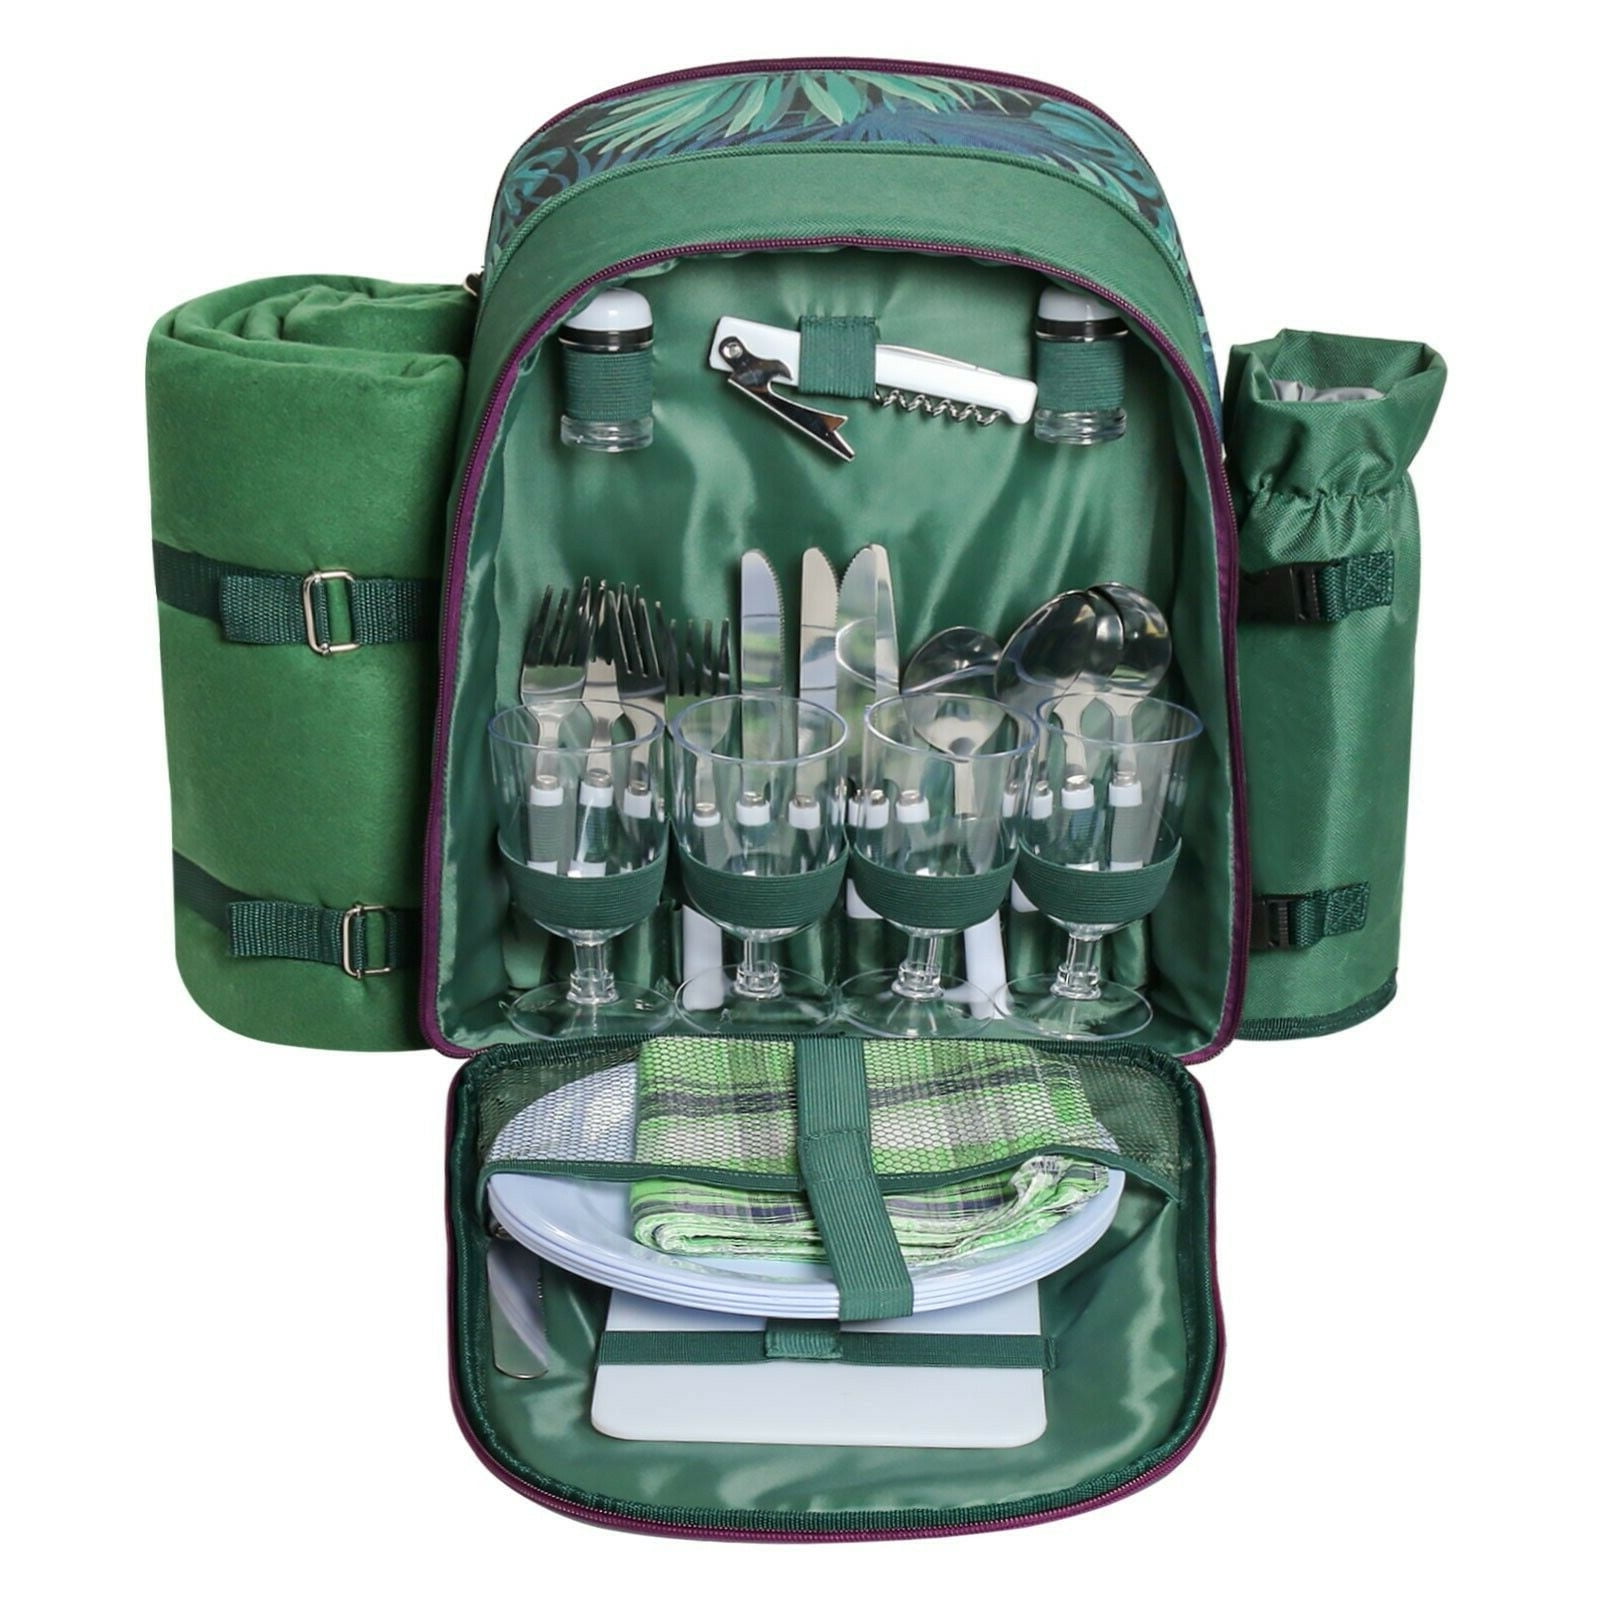 Picnic Backpack for 4 Person with Blanket, Picnic Bag Set with